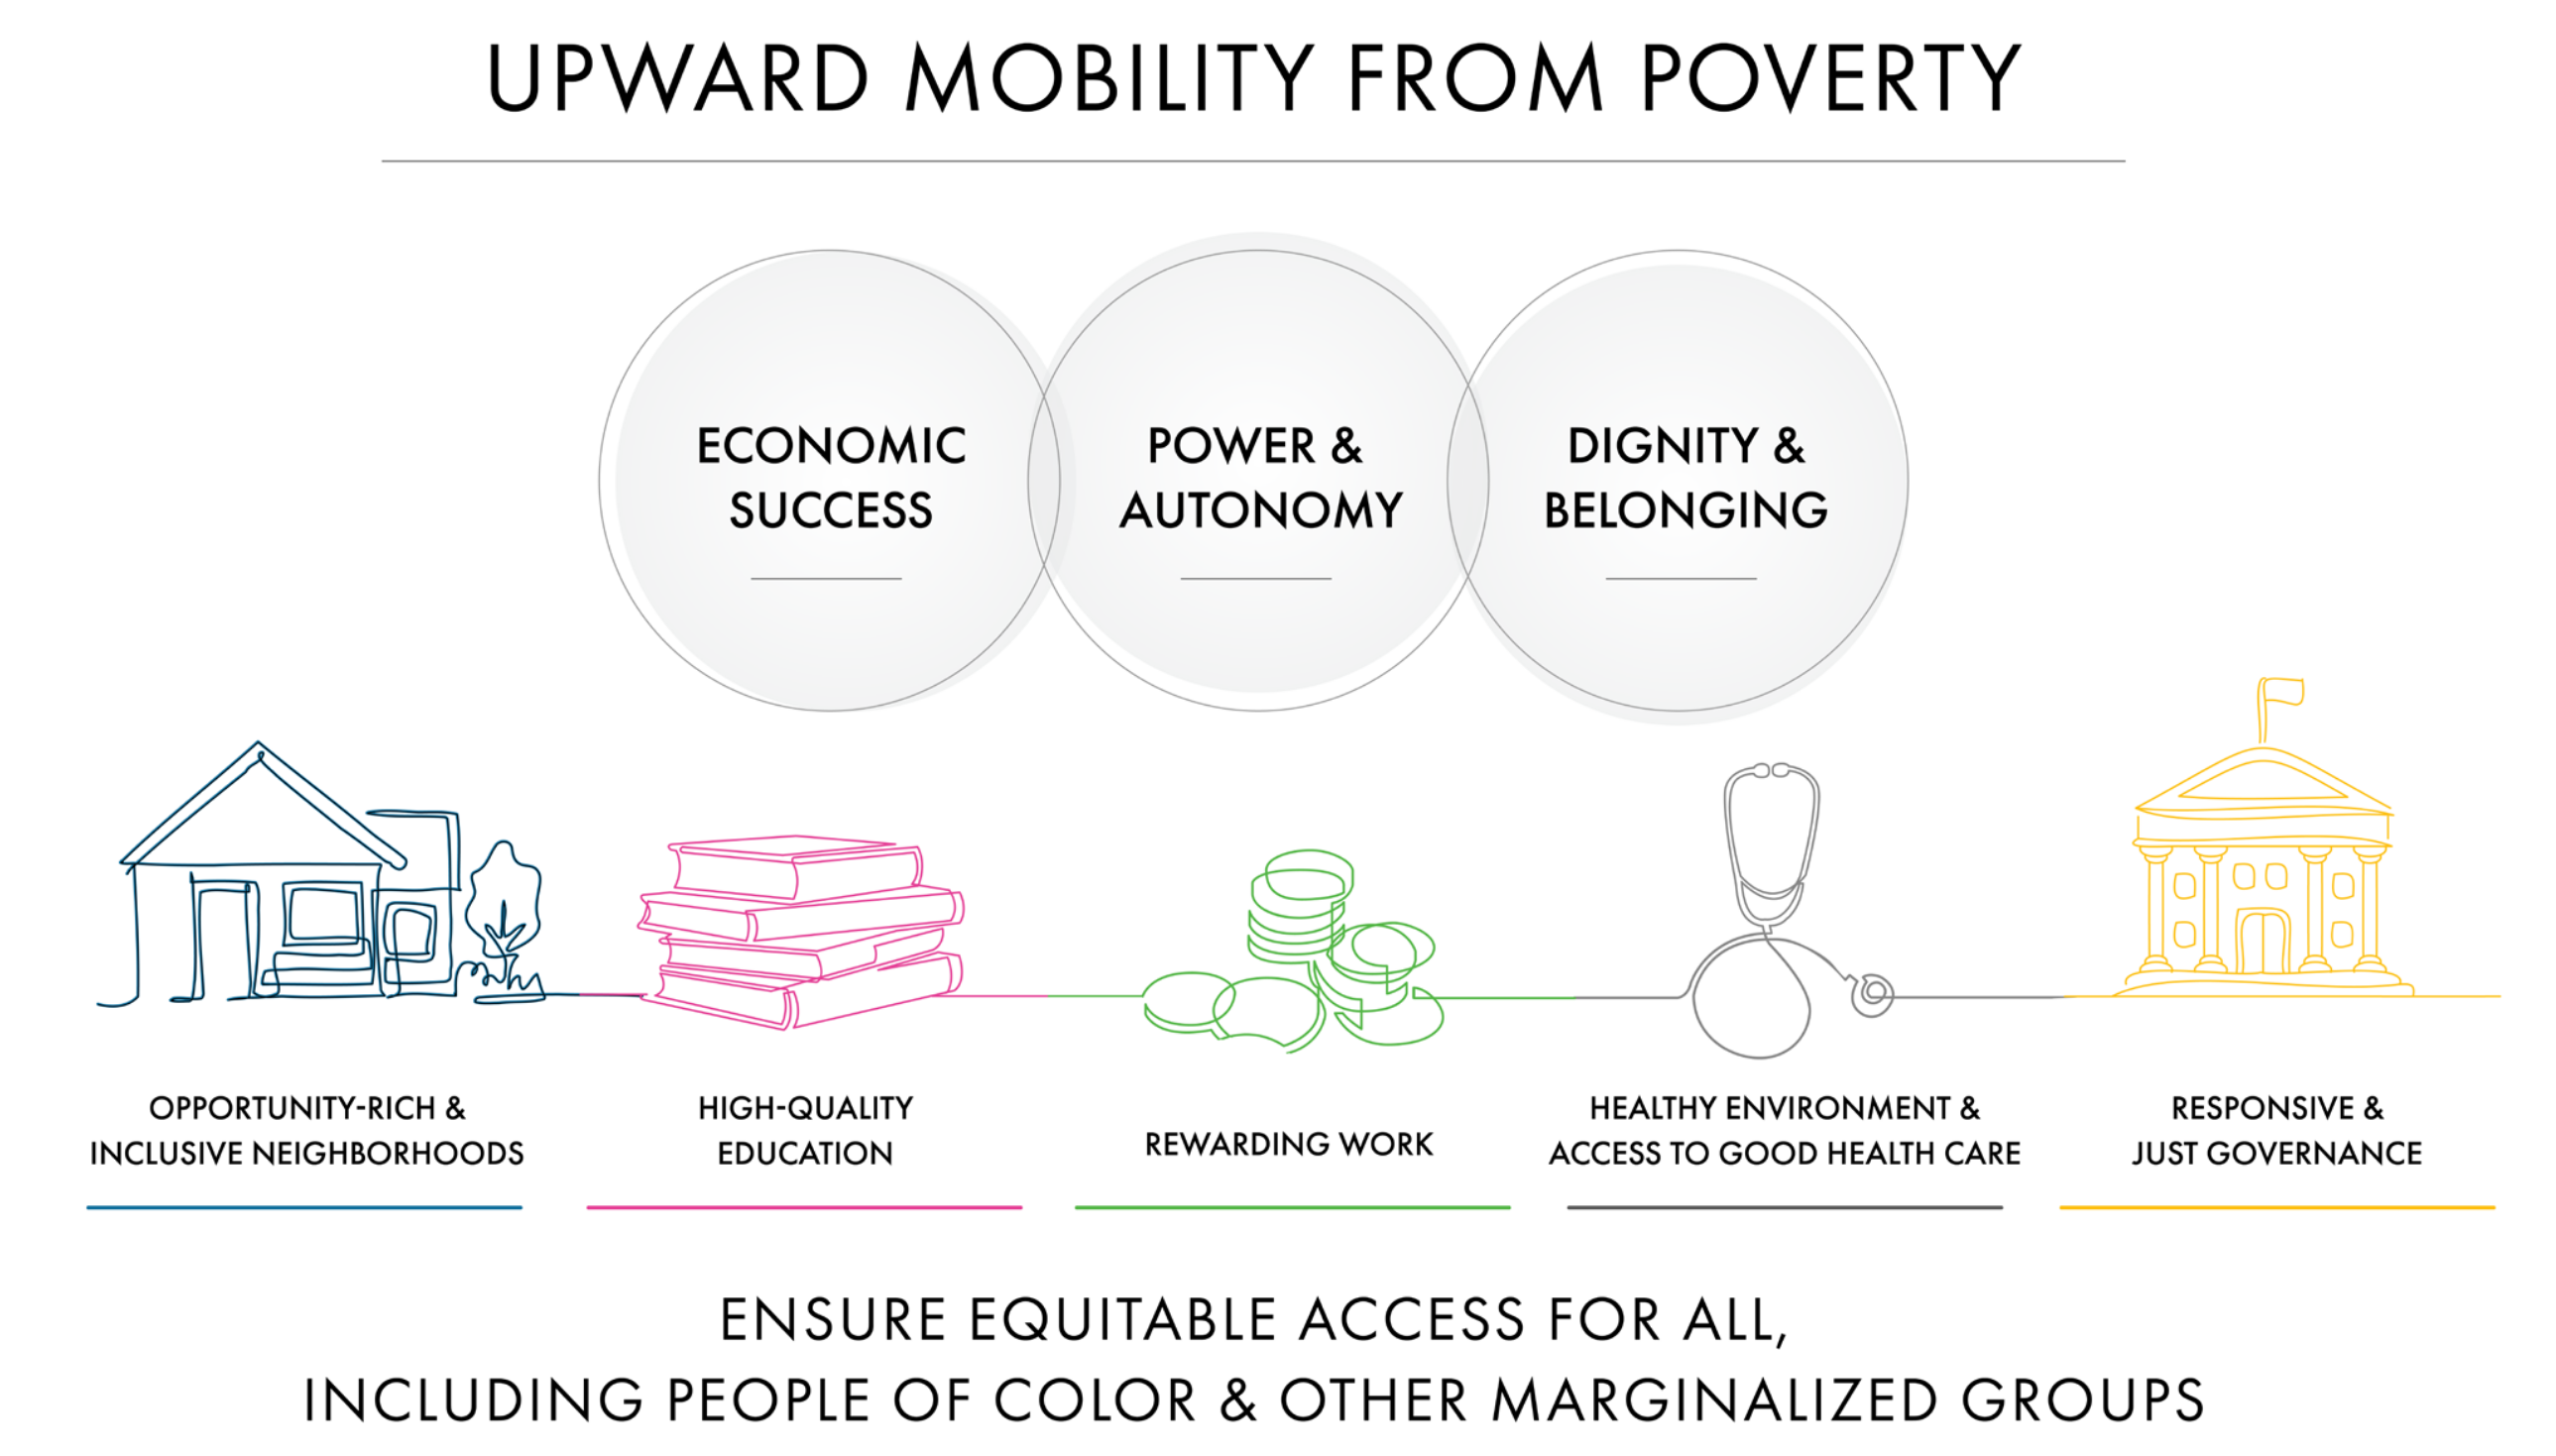 Upward mobility from poverty 3 domains and 5 pillars graphic